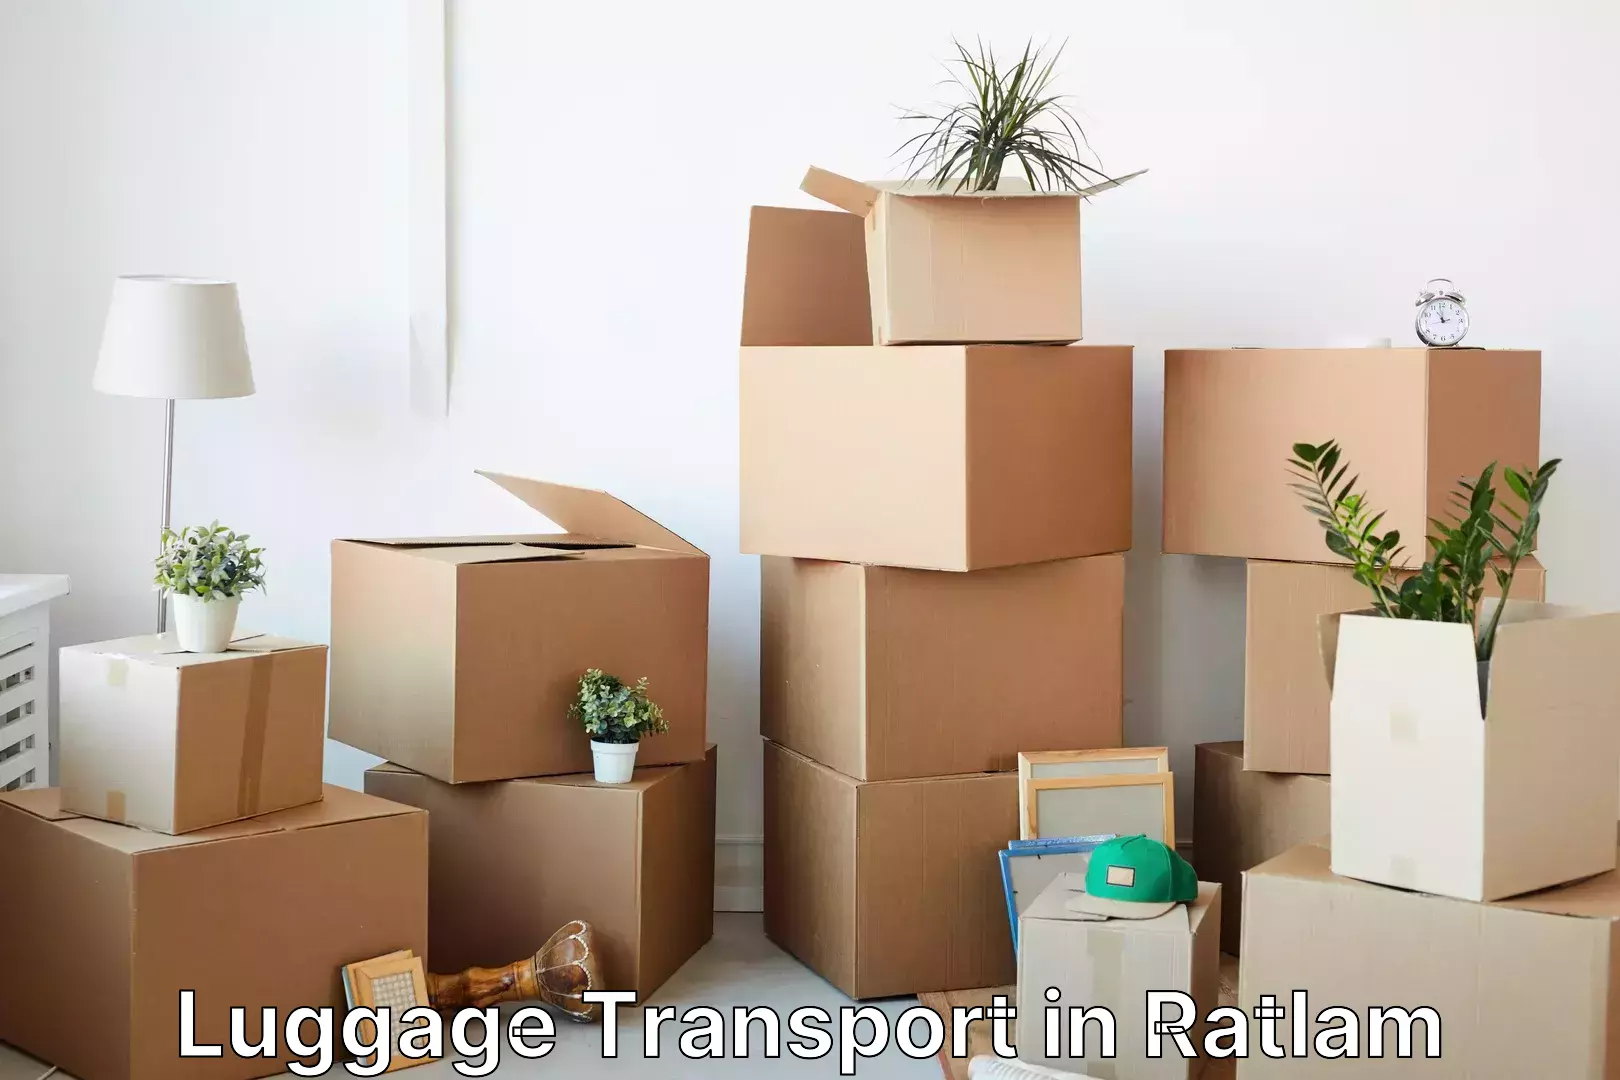 Luggage shipment tracking in Ratlam